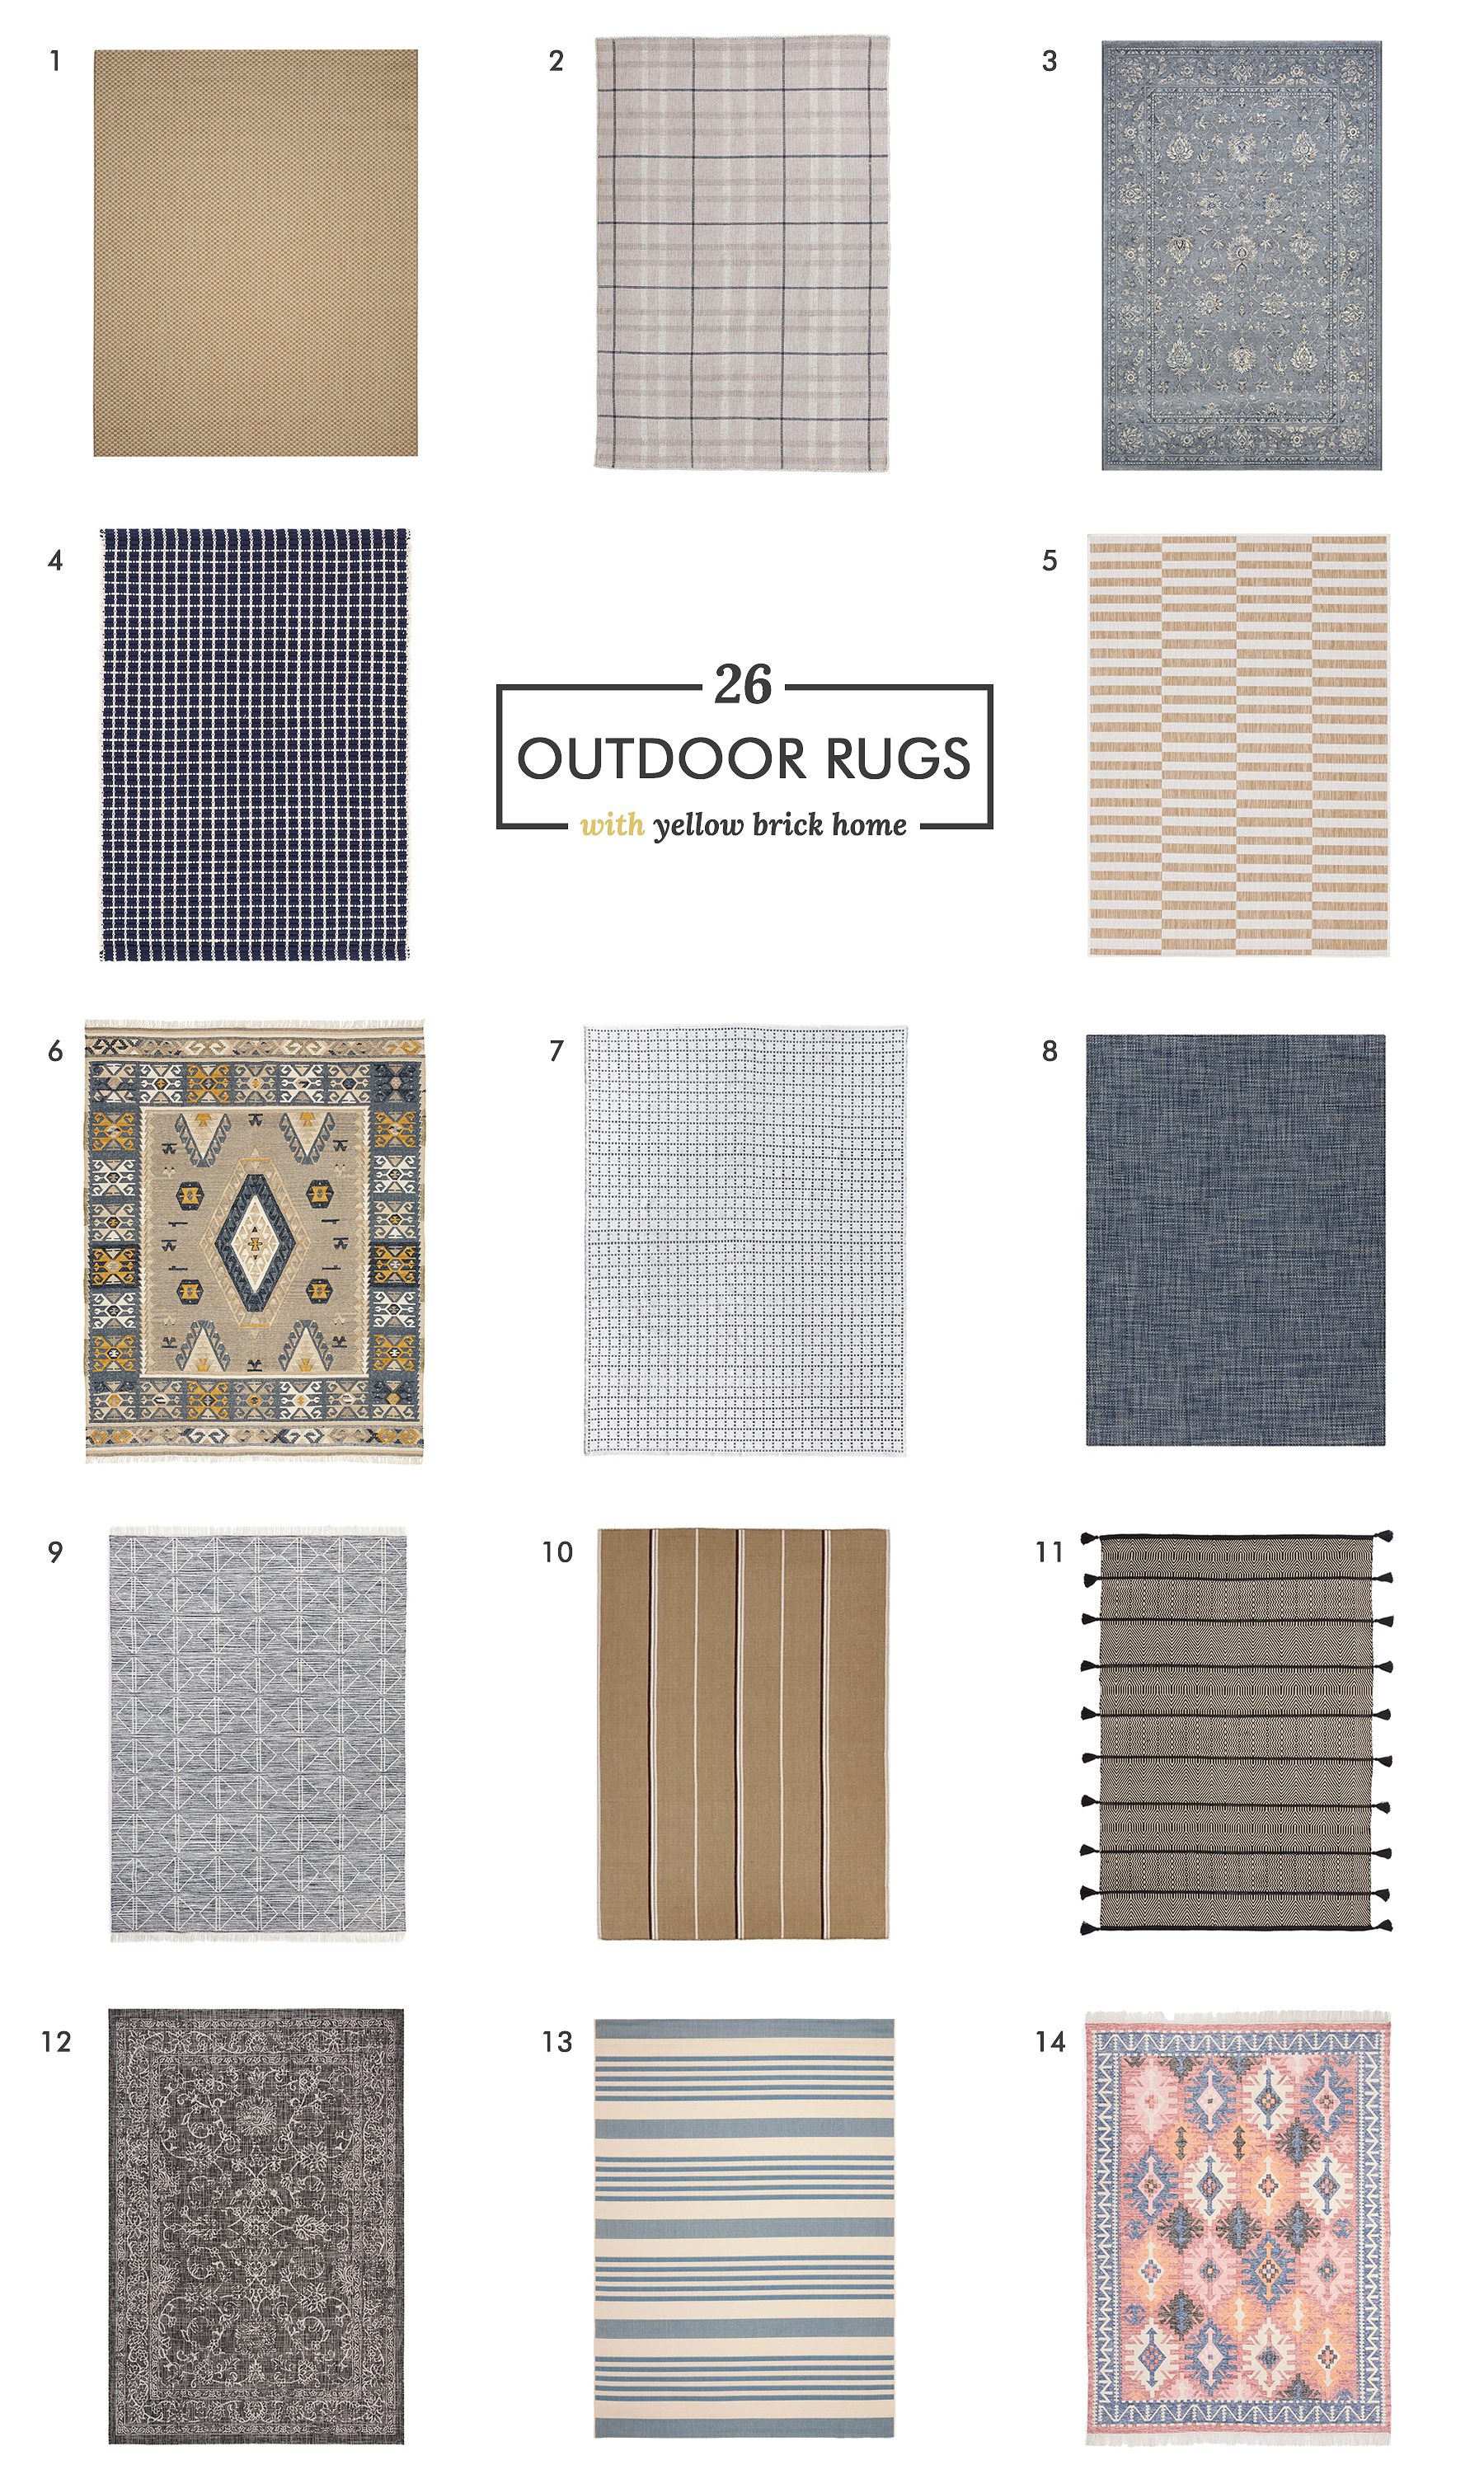 A grid of many outdoor rug options // via yellow brick home